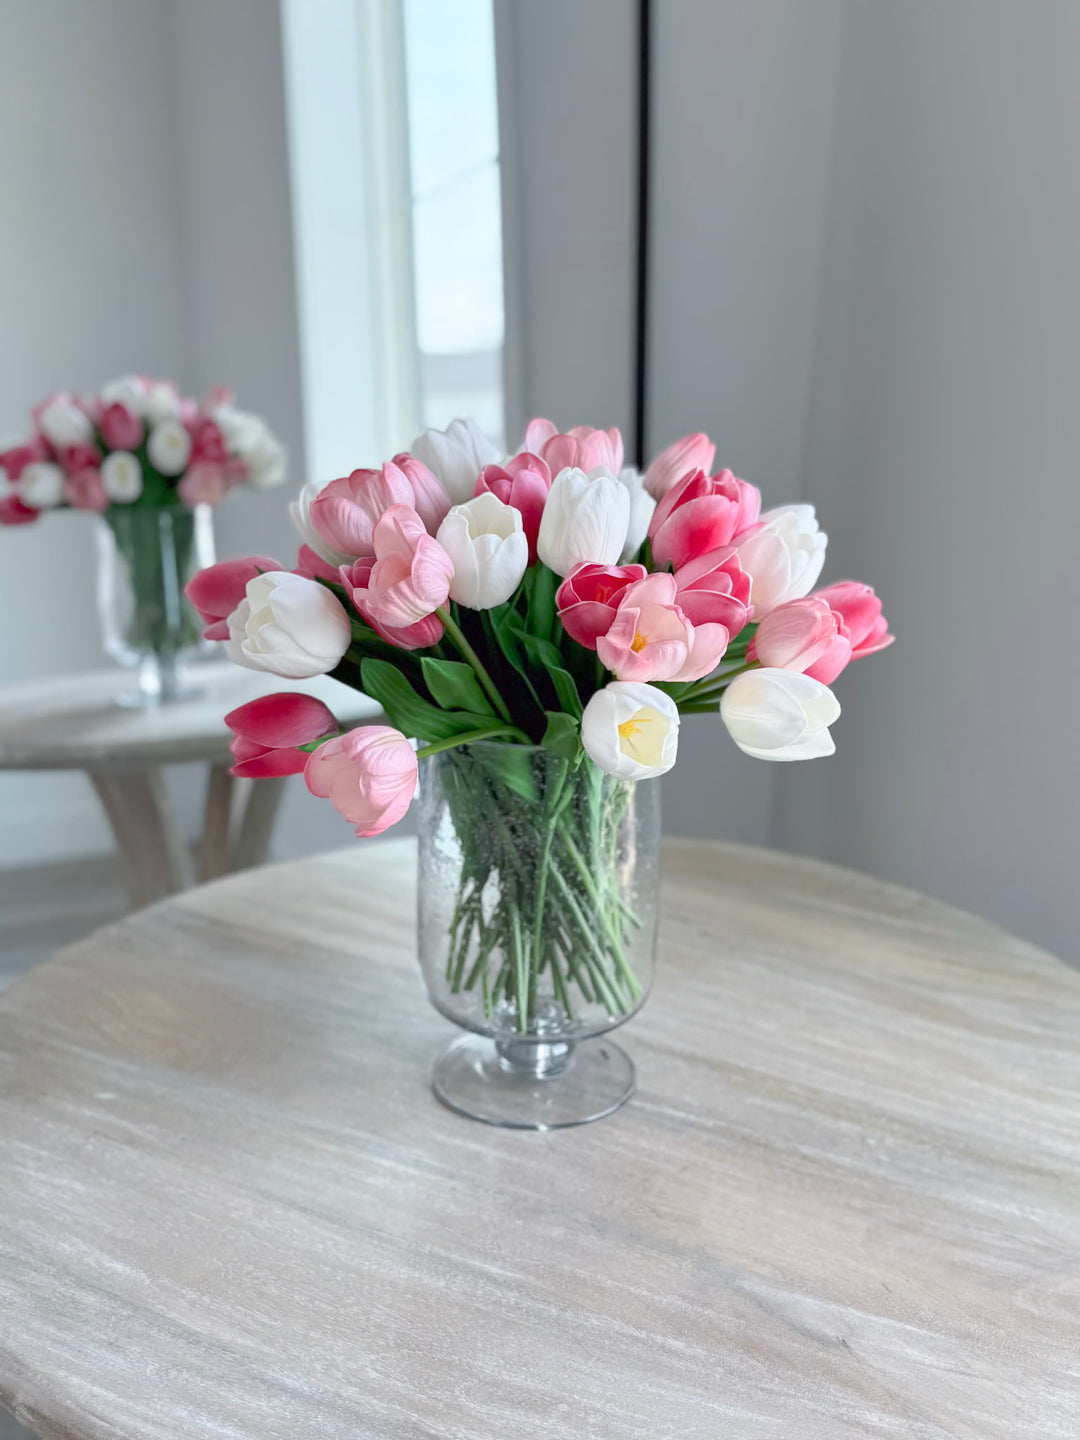 Real Touch Light Pink Tulip Bundle